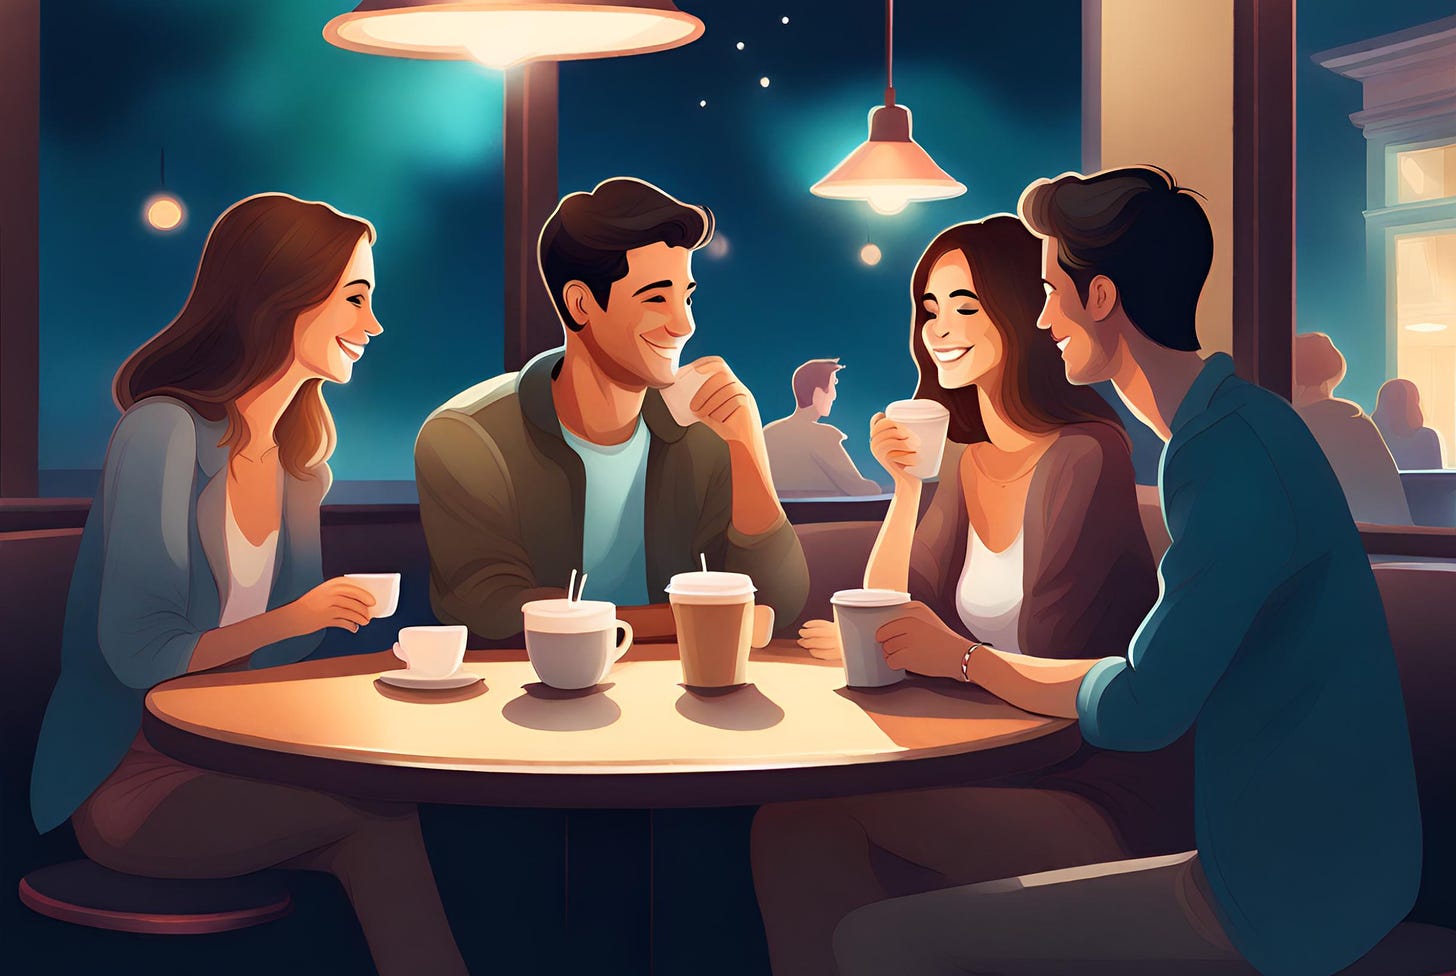 Illustration of a group of friends sitting at a table in a coffee shop